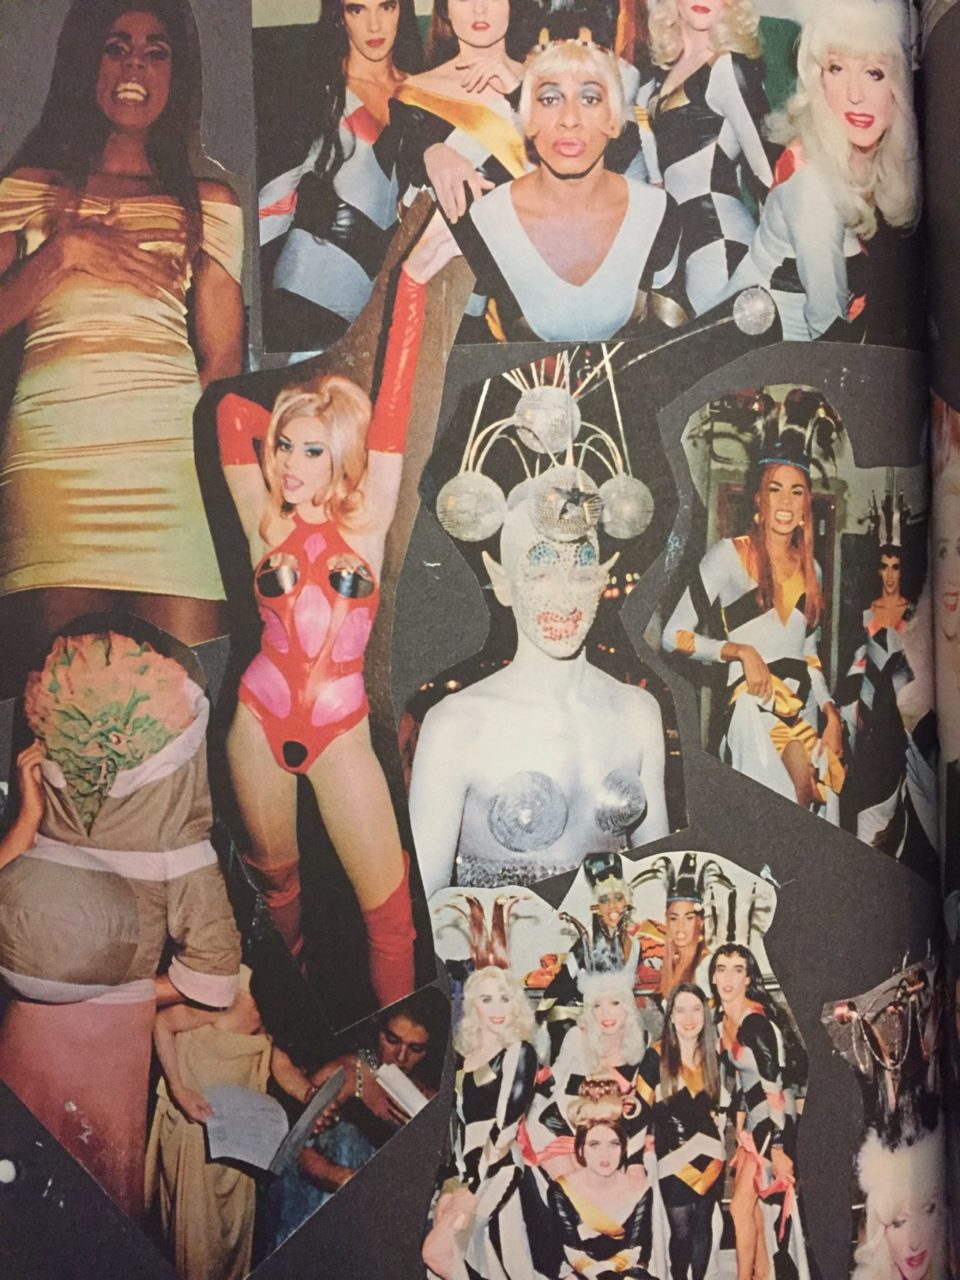 Photos from the 1989 Love Ball